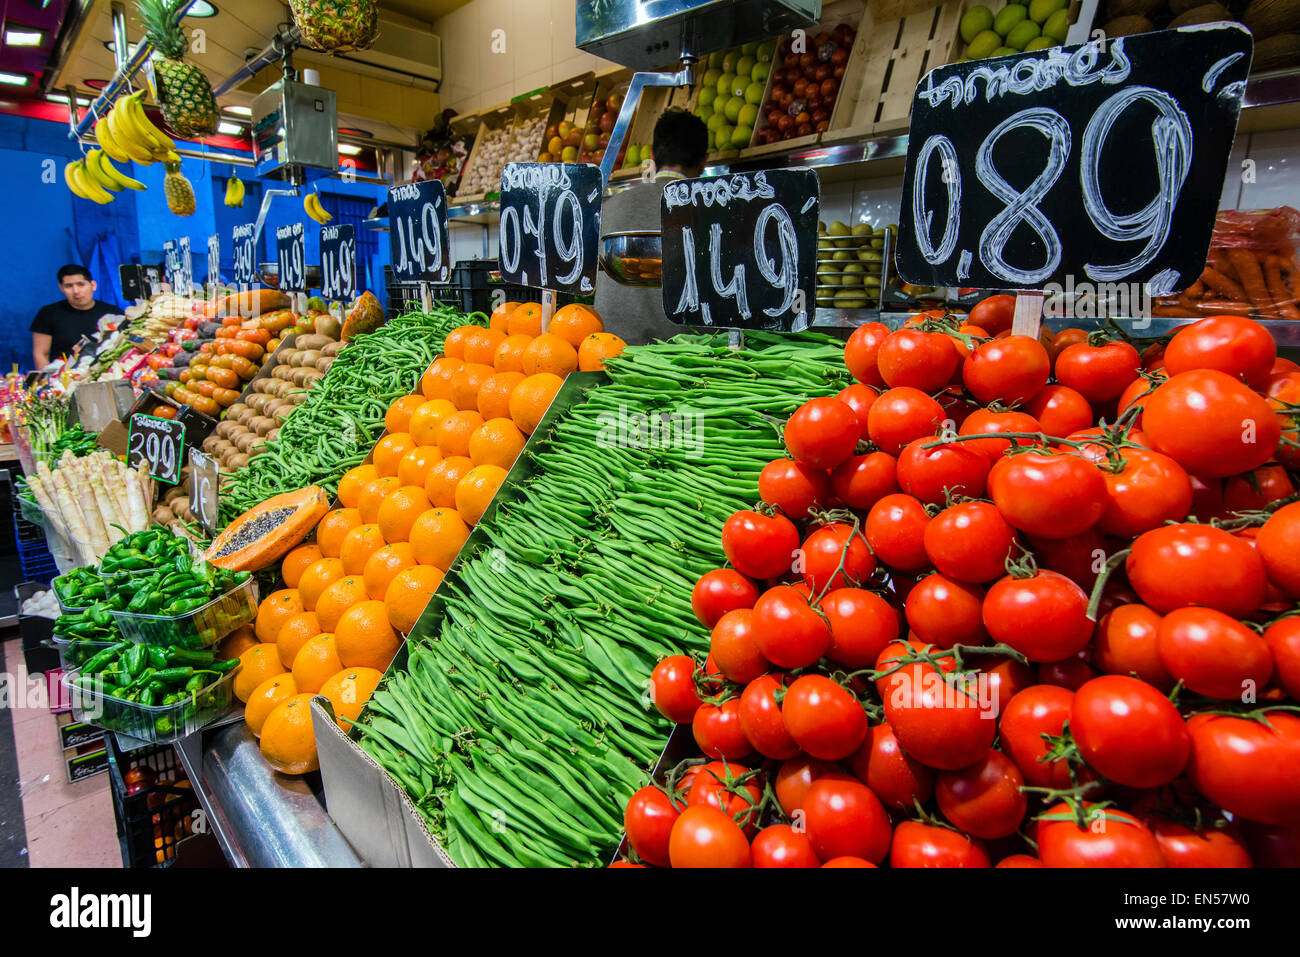 Colorful fruit and vegetables stall at Boqueria food market, Barcelona, Catalonia, Spain Stock Photo